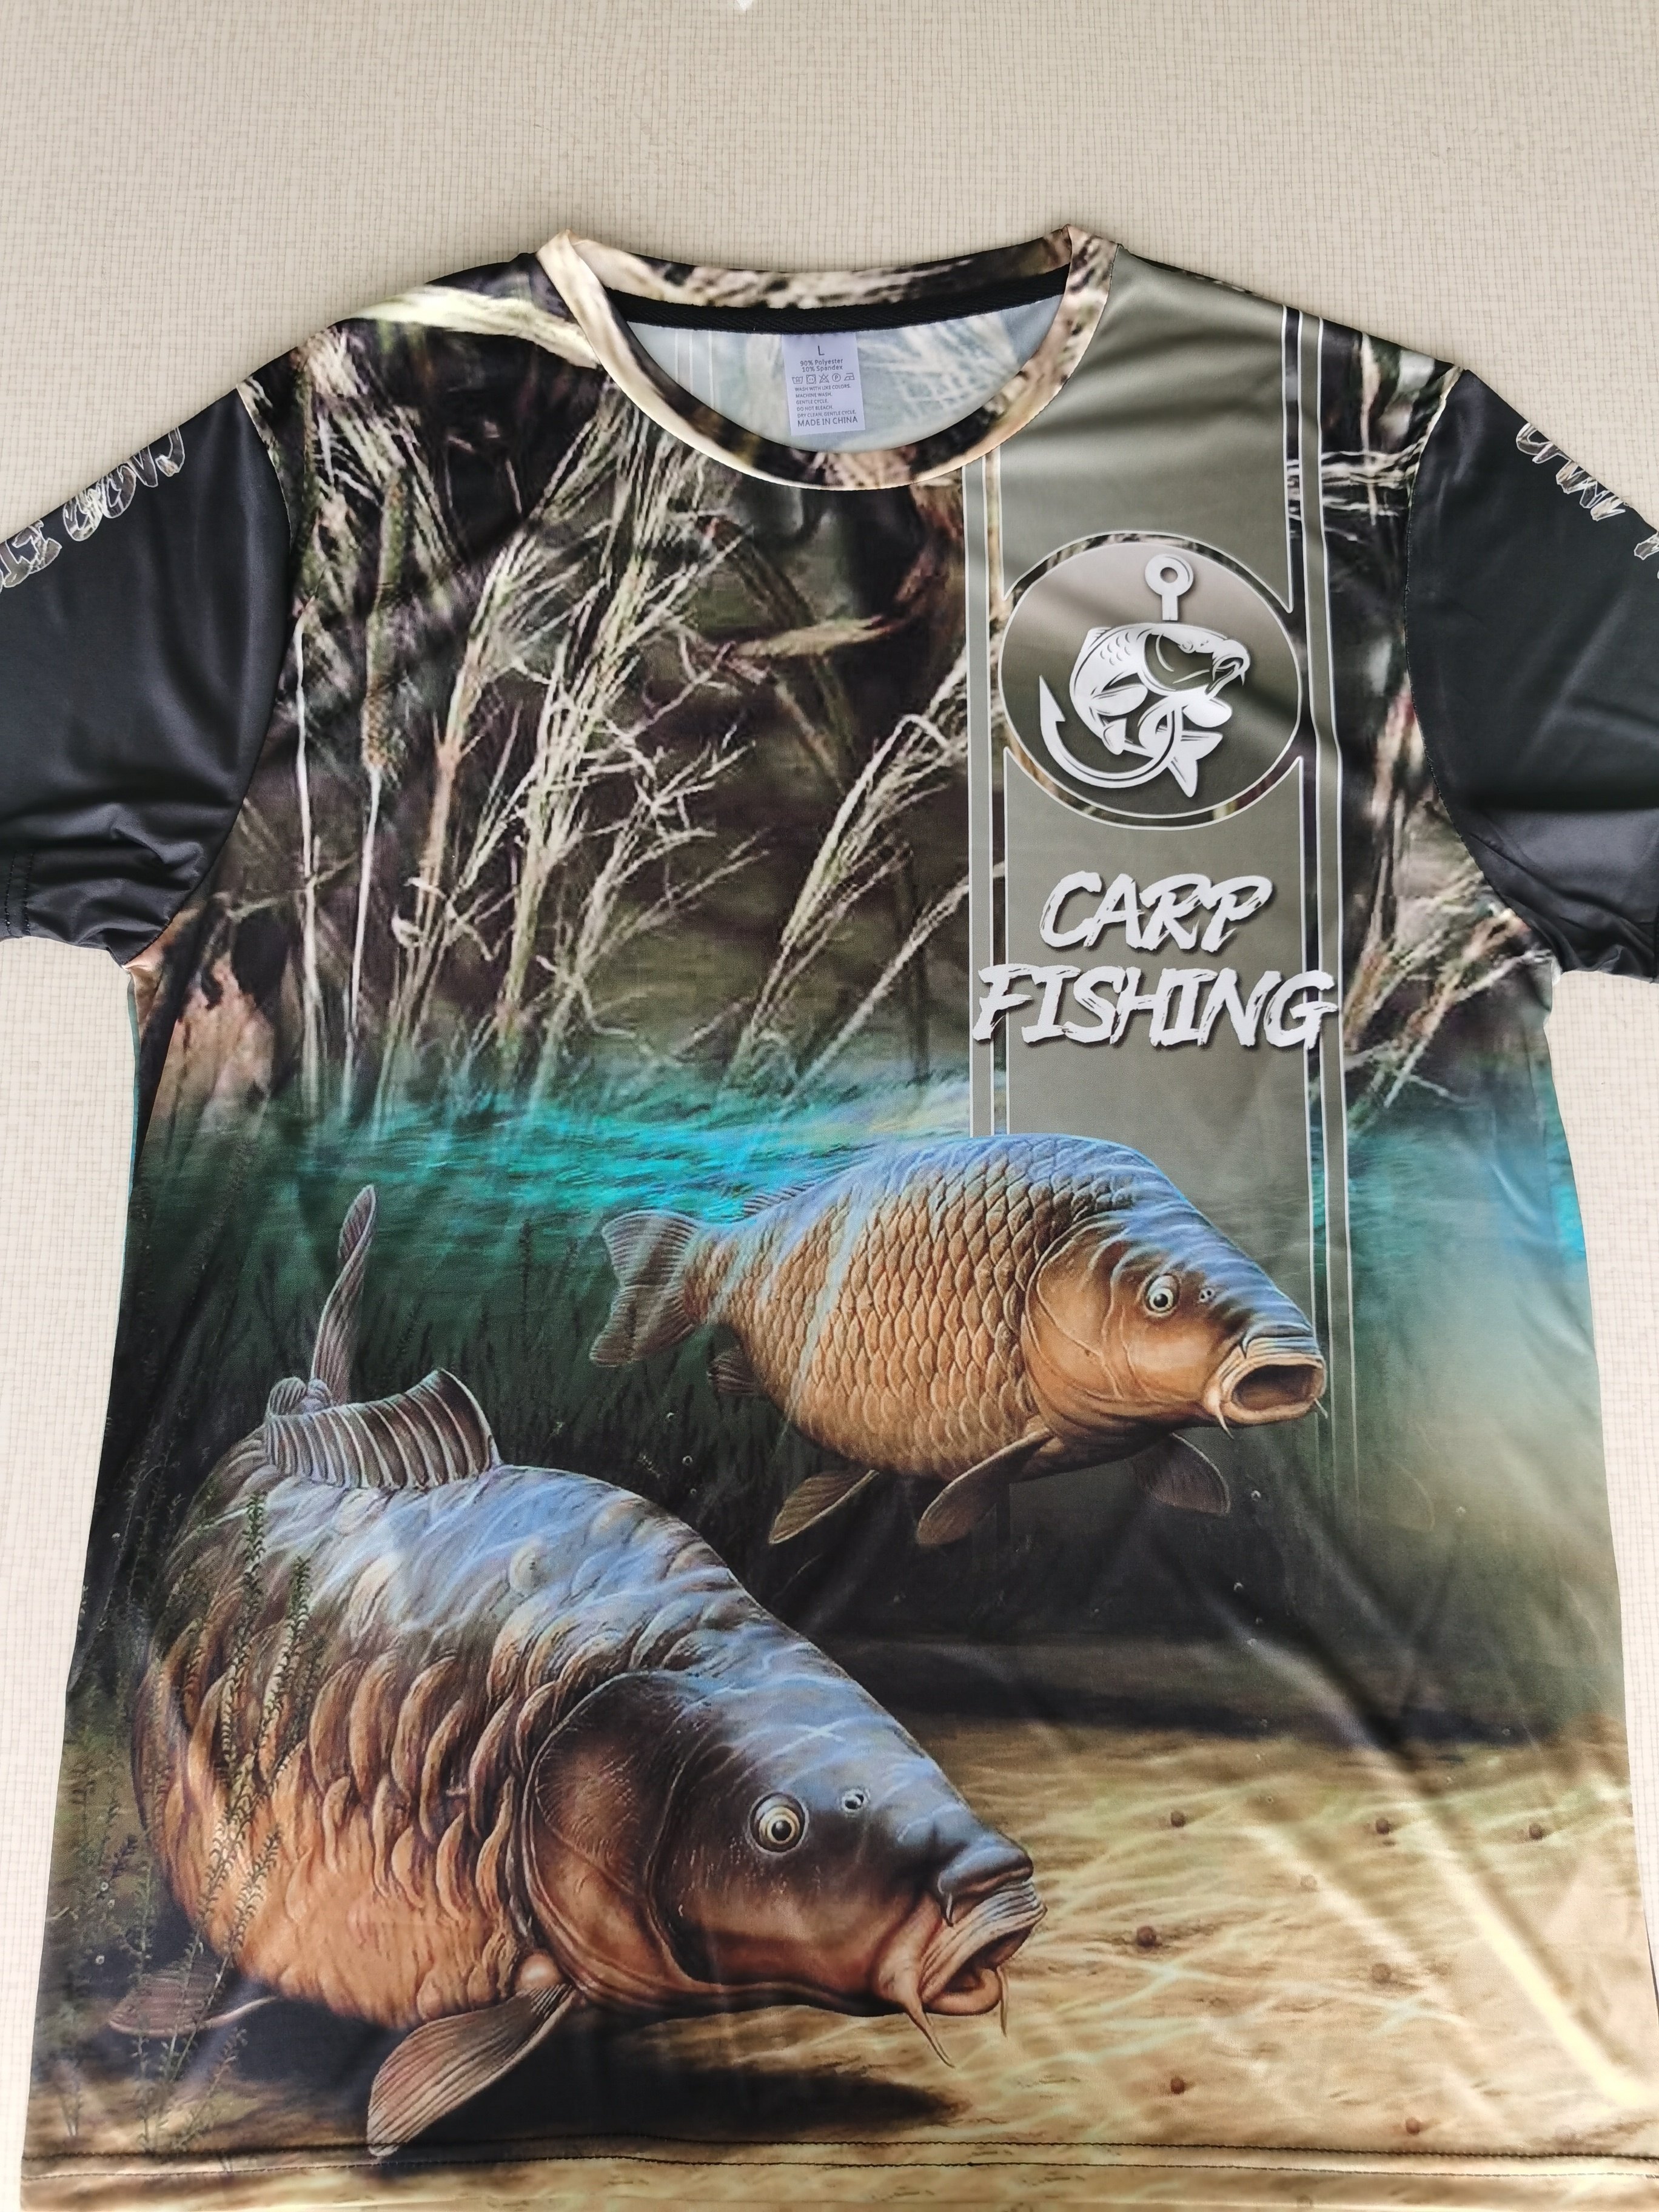 3D Fishing Print, Men's * Stretch Breathable T-shirt For Outdoor Summer,  Gift For Men